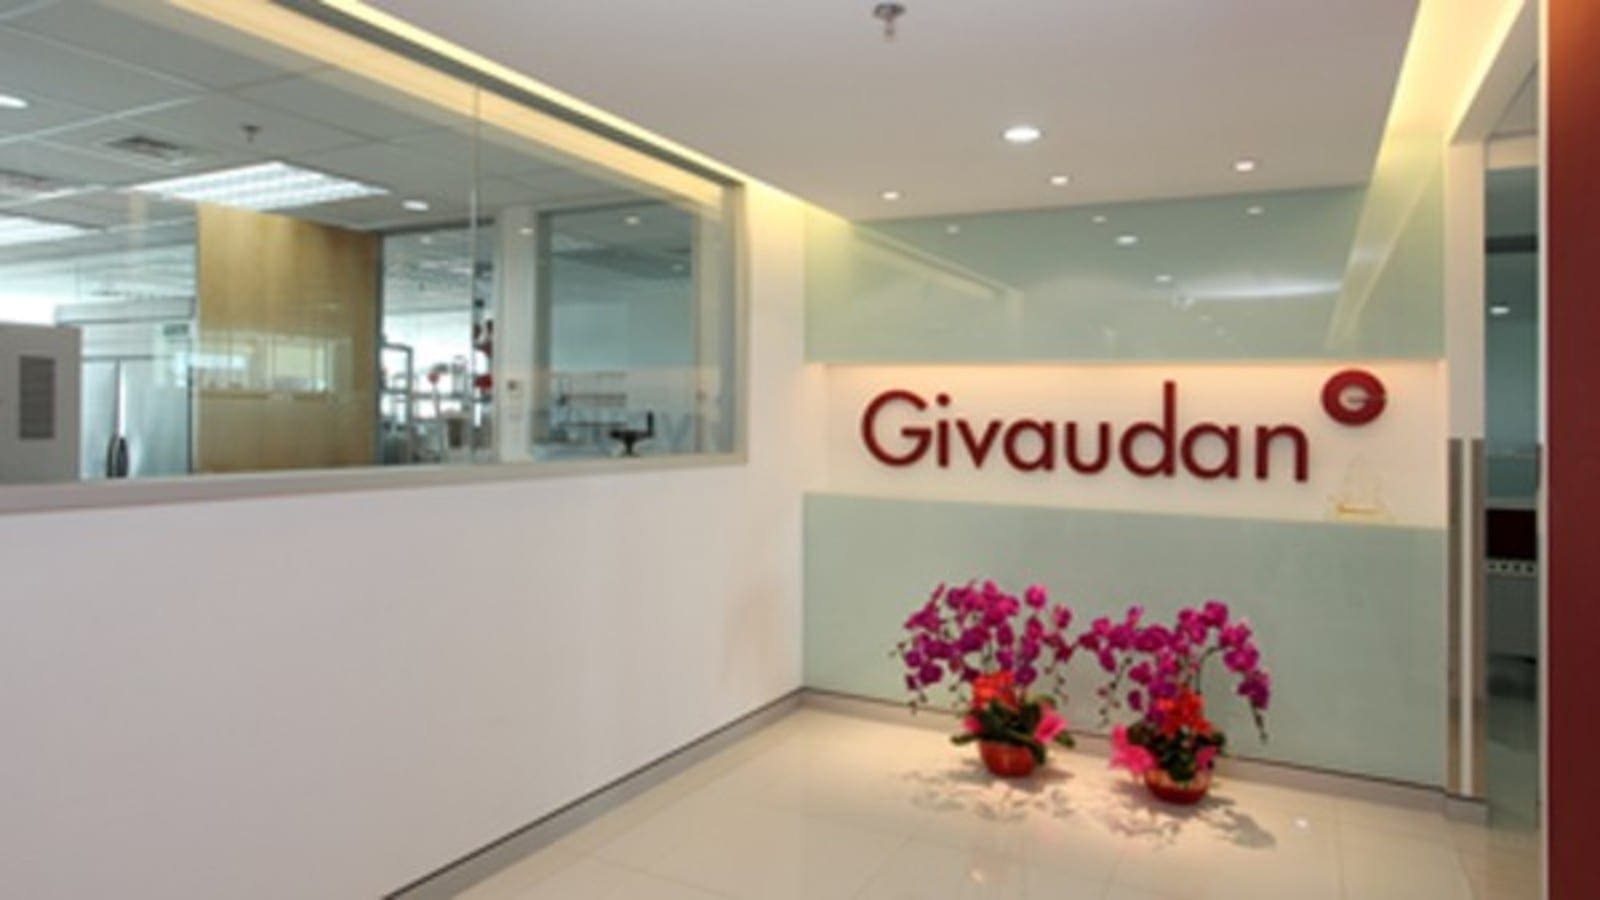 Givaudan, Novozymes to partner in development of new food ingredients and technologies